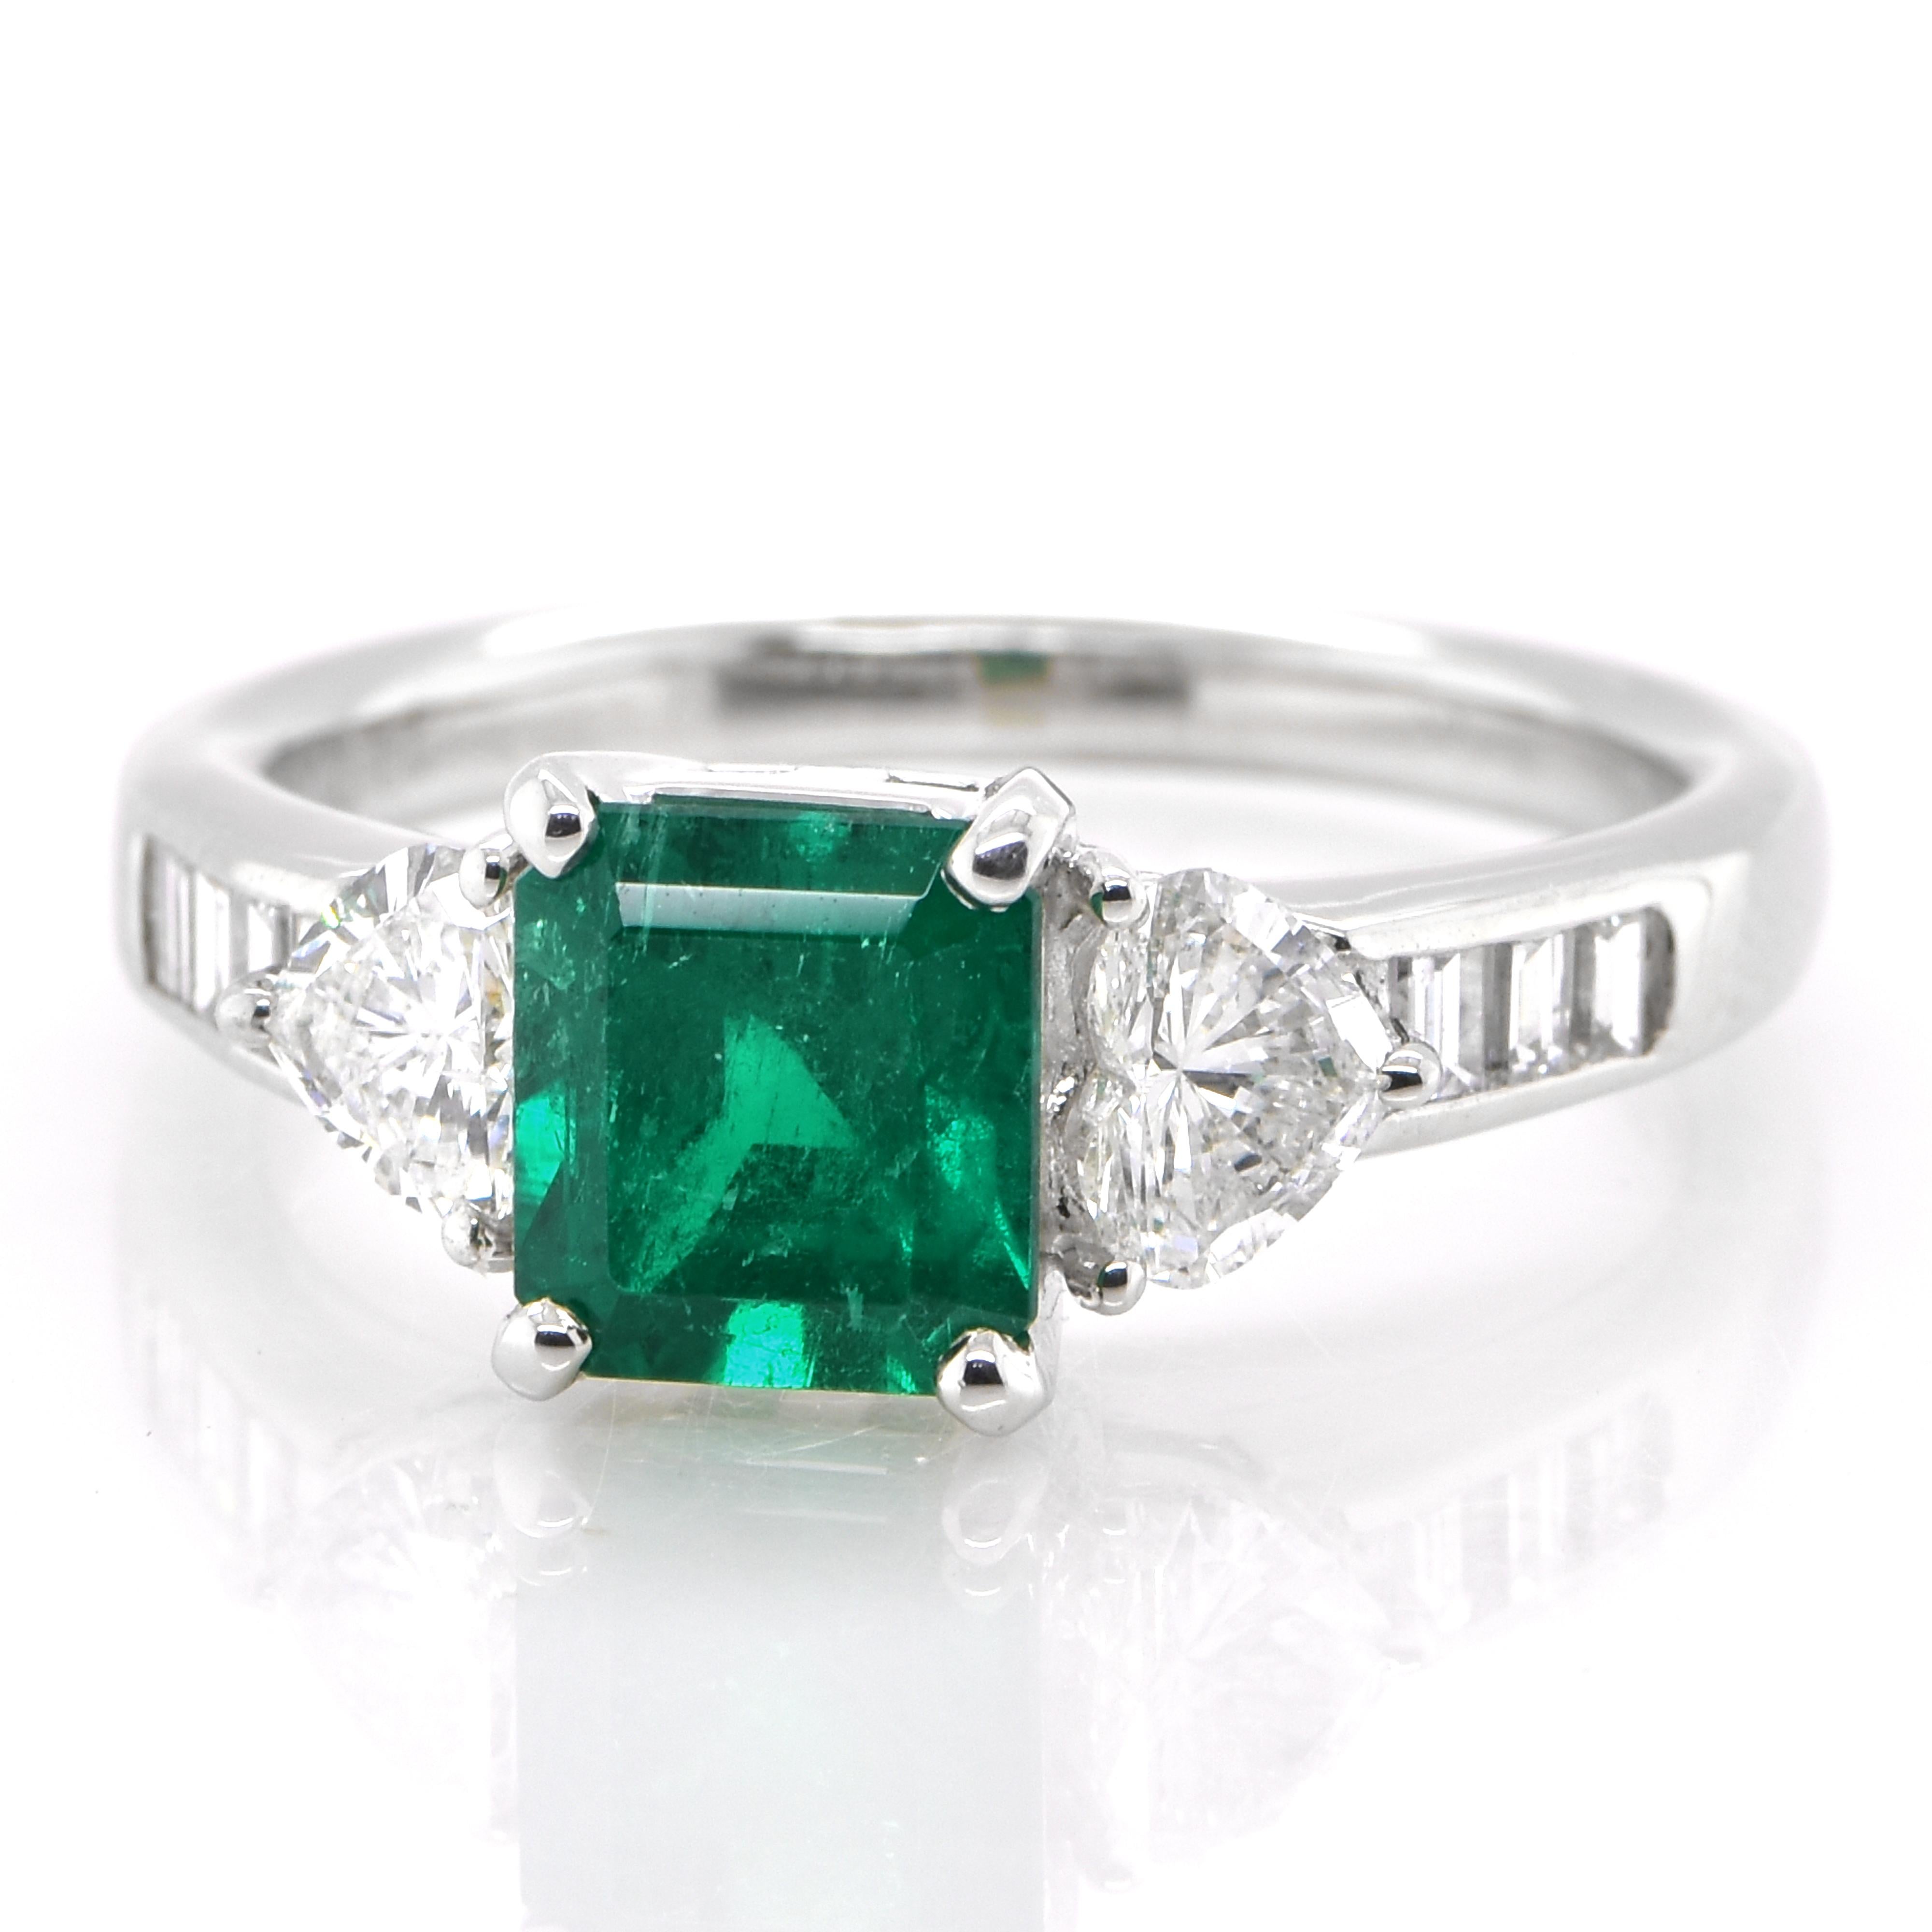 A stunning ring featuring a 1.39 Carat Natural Emerald and 0.70 Carats of Diamond Accents set in Platinum. People have admired emerald’s green for thousands of years. Emeralds have always been associated with the lushest landscapes and the richest